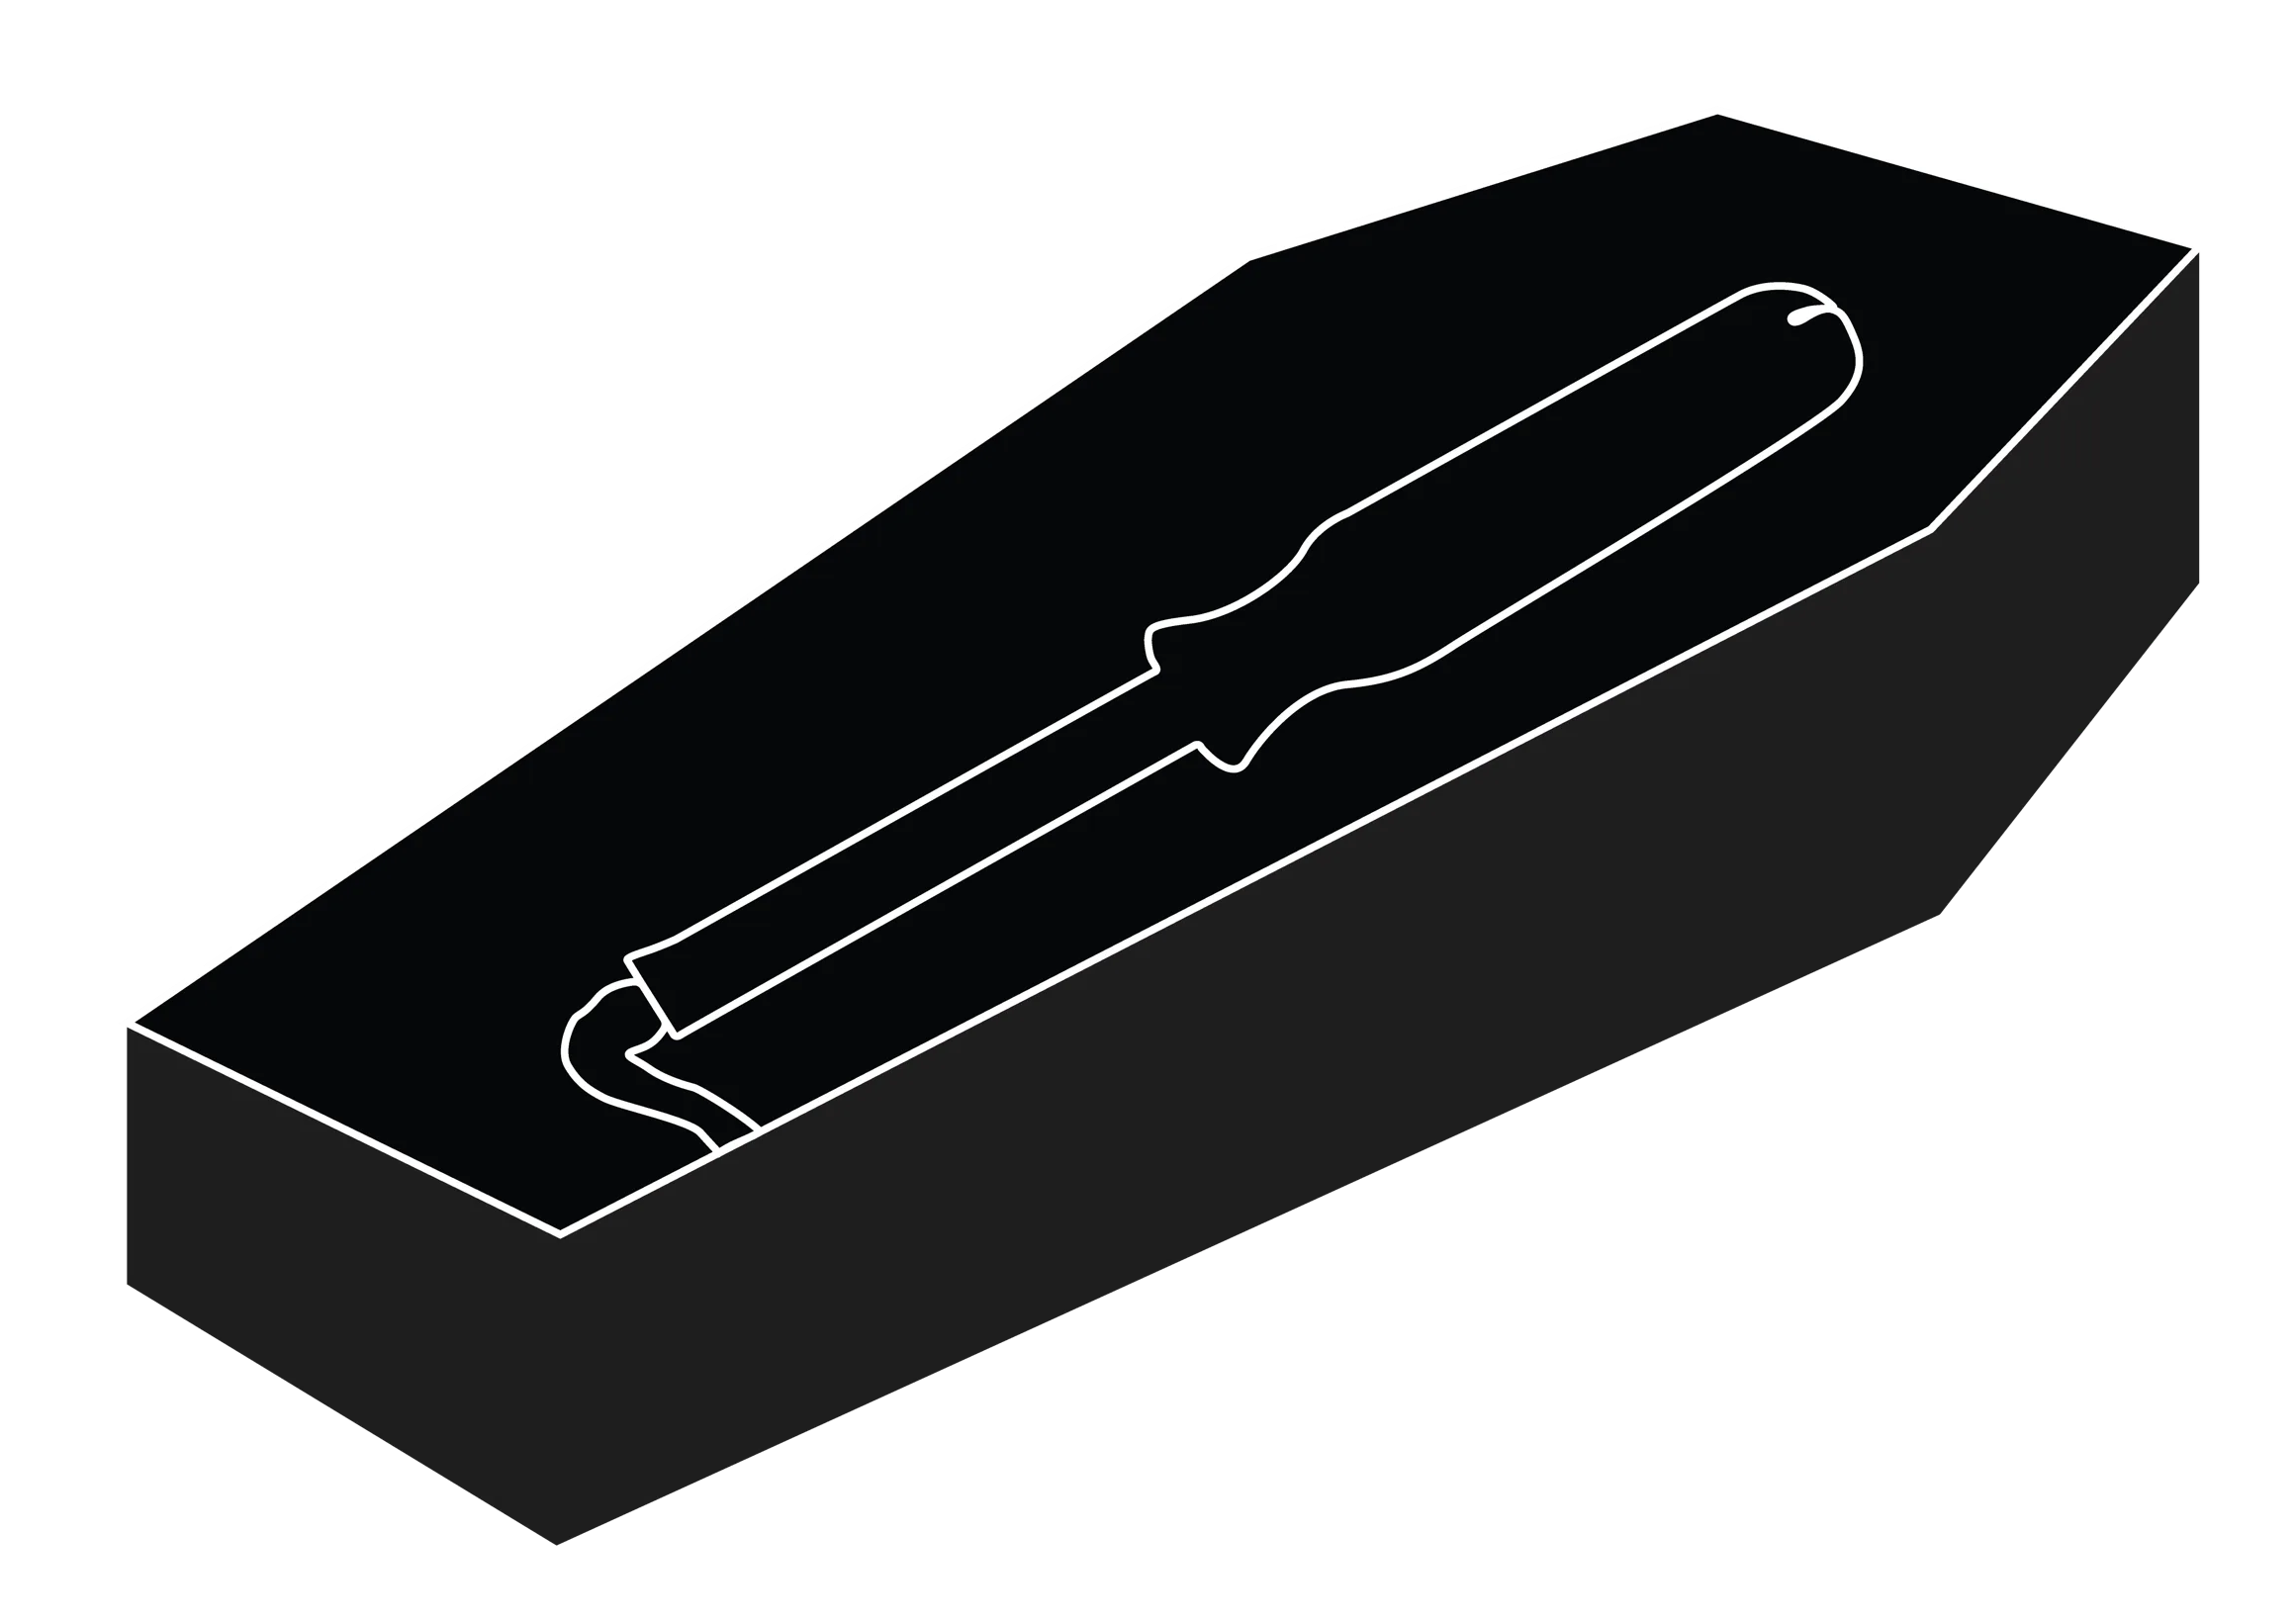 Vampon Tampon in a Coffin